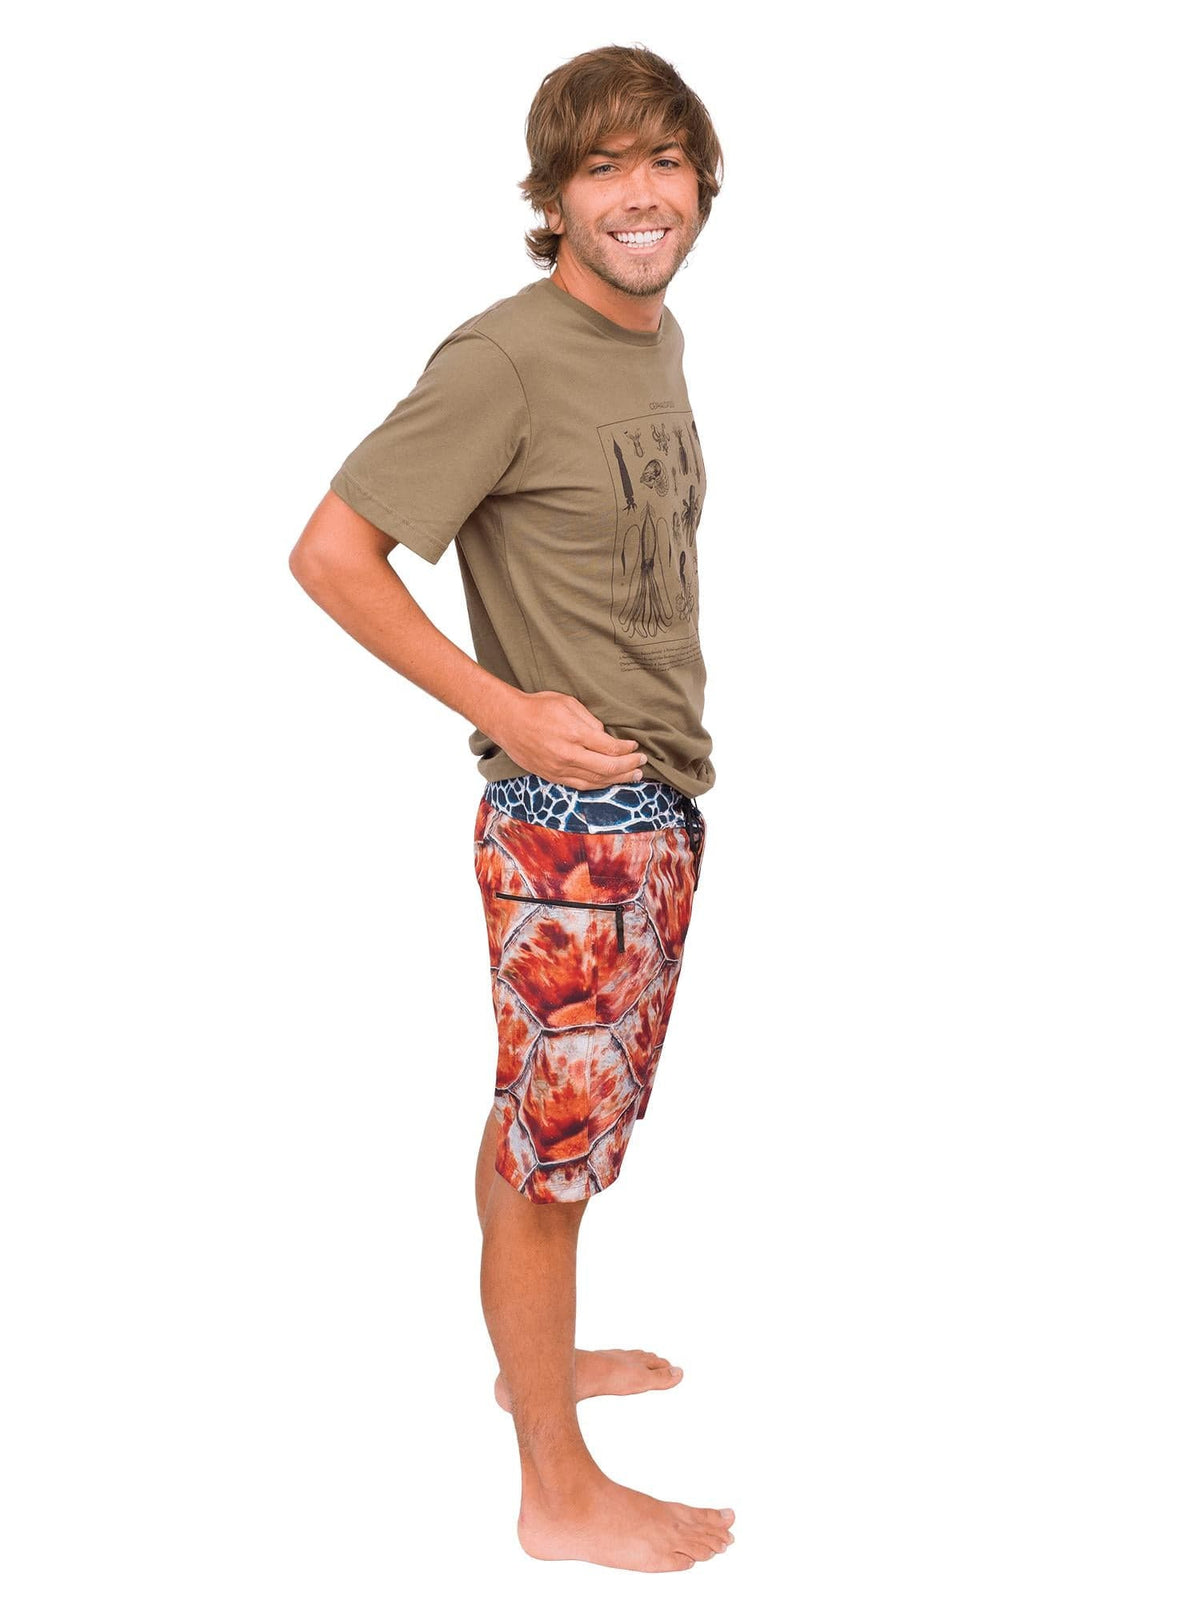 Model: Dan is a sea turtle monitor with Sea Turtle Adventures. He is 5’10, 140 lbs and is wearing a size M tee and 31 boardshort.